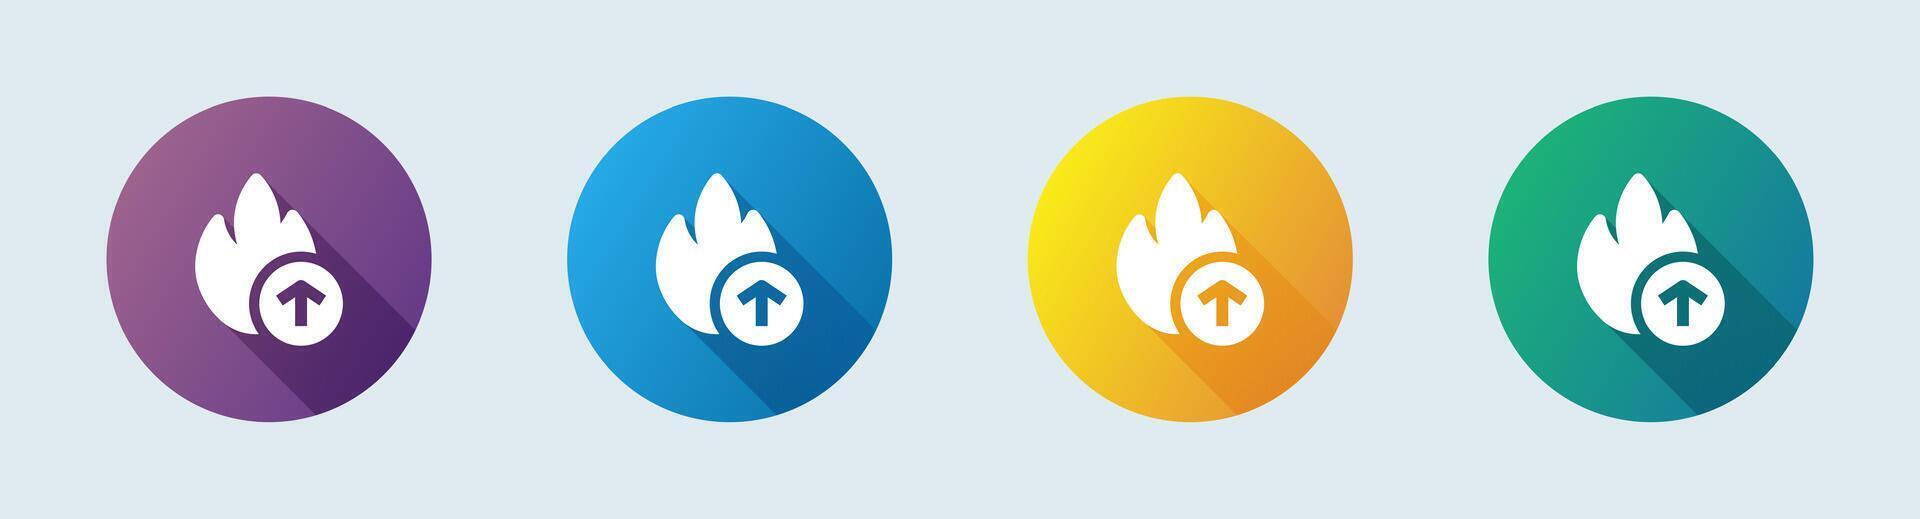 Viral solid icon in flat design style. Flames signs vector illustration.